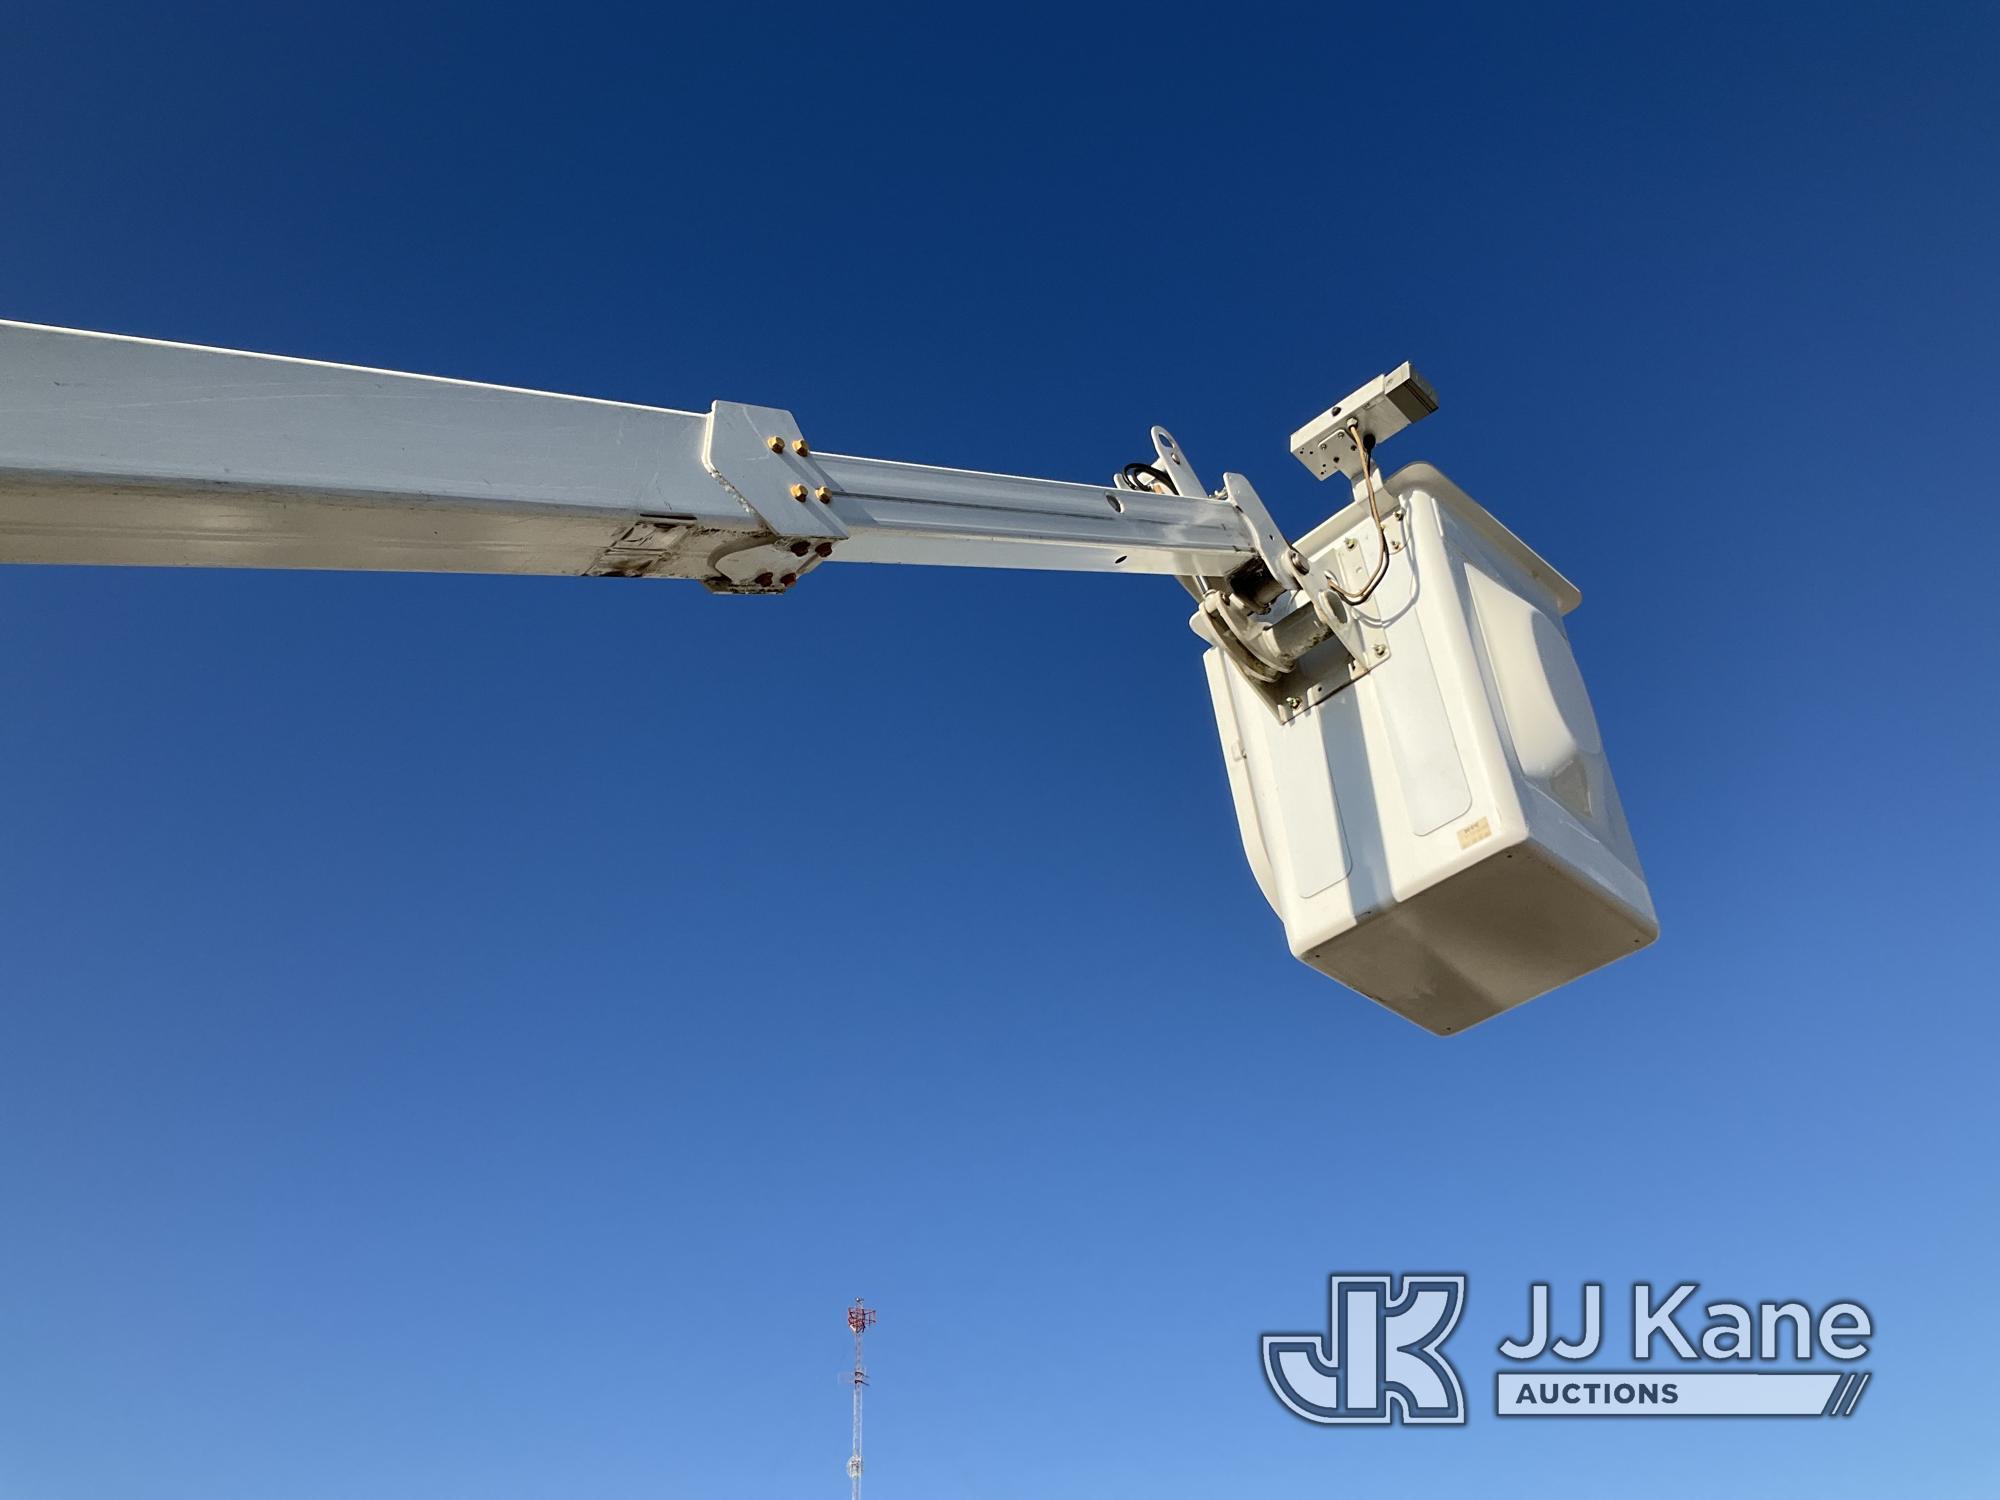 (Waxahachie, TX) Altec AT200, Telescopic Non-Insulated Bucket Truck mounted behind cab on 2016 RAM 4